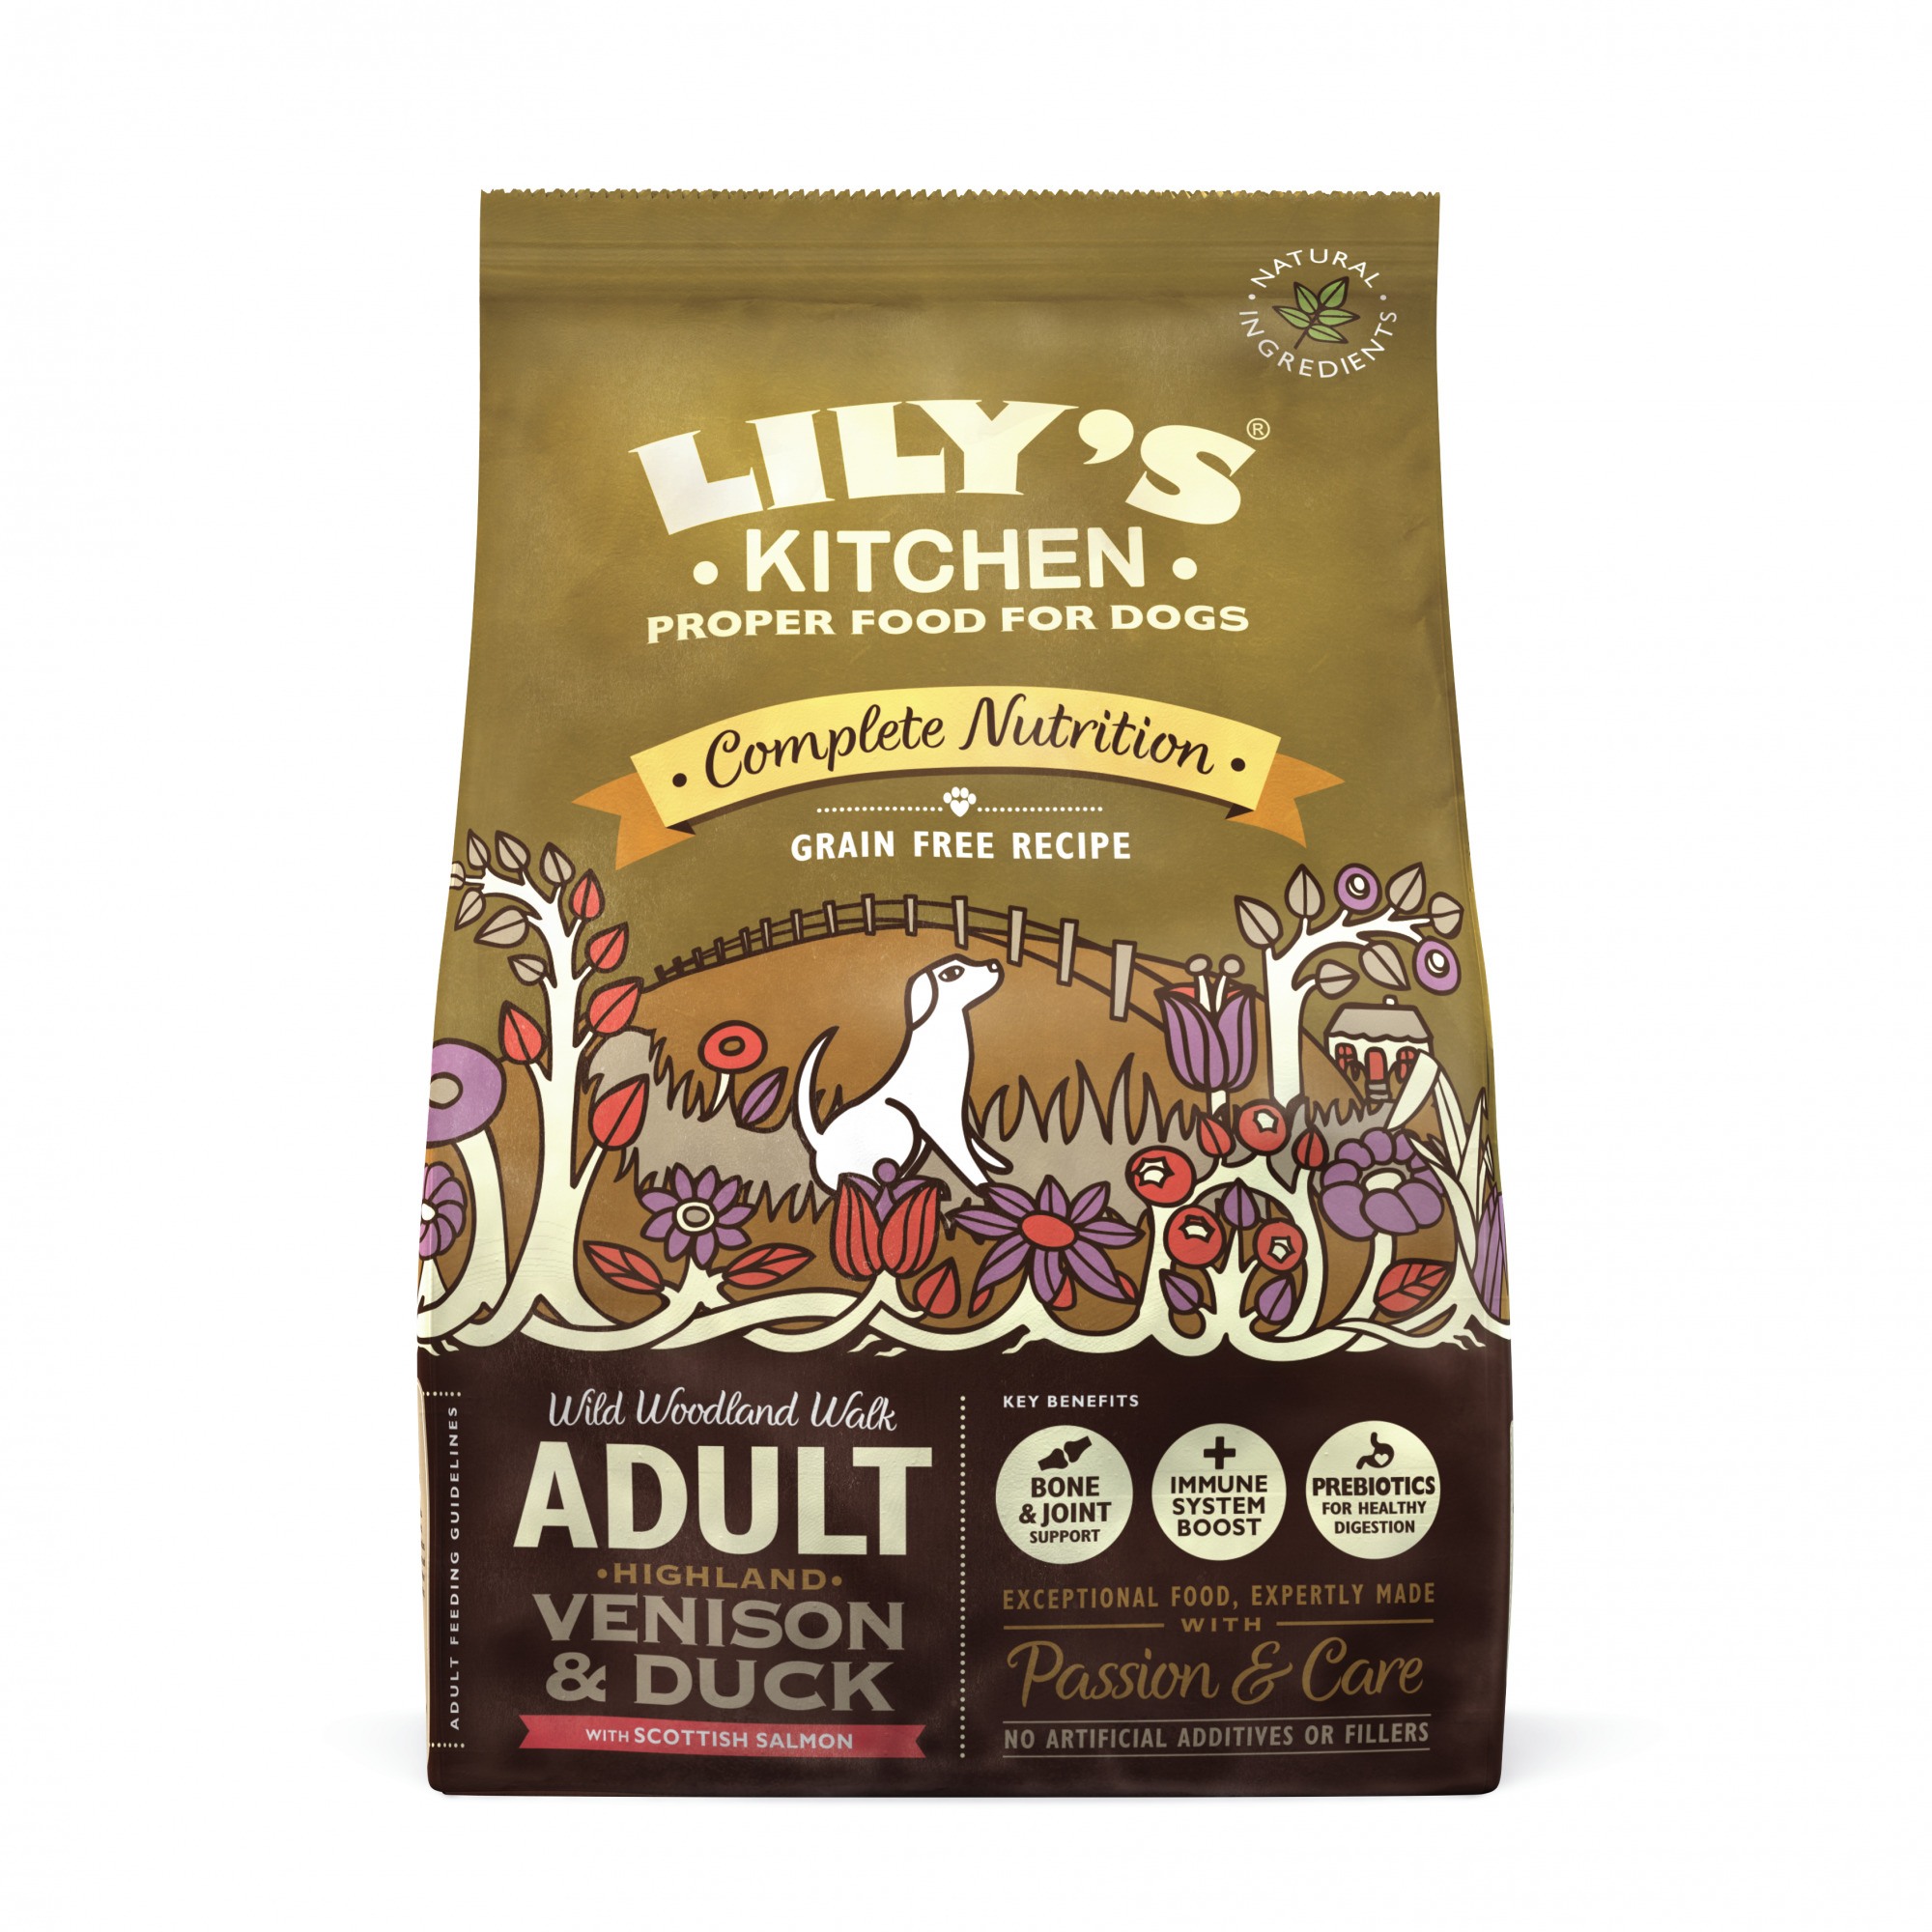 Lily's Kitchen Wild Woodland Walk Dog Food | FREE delivery available